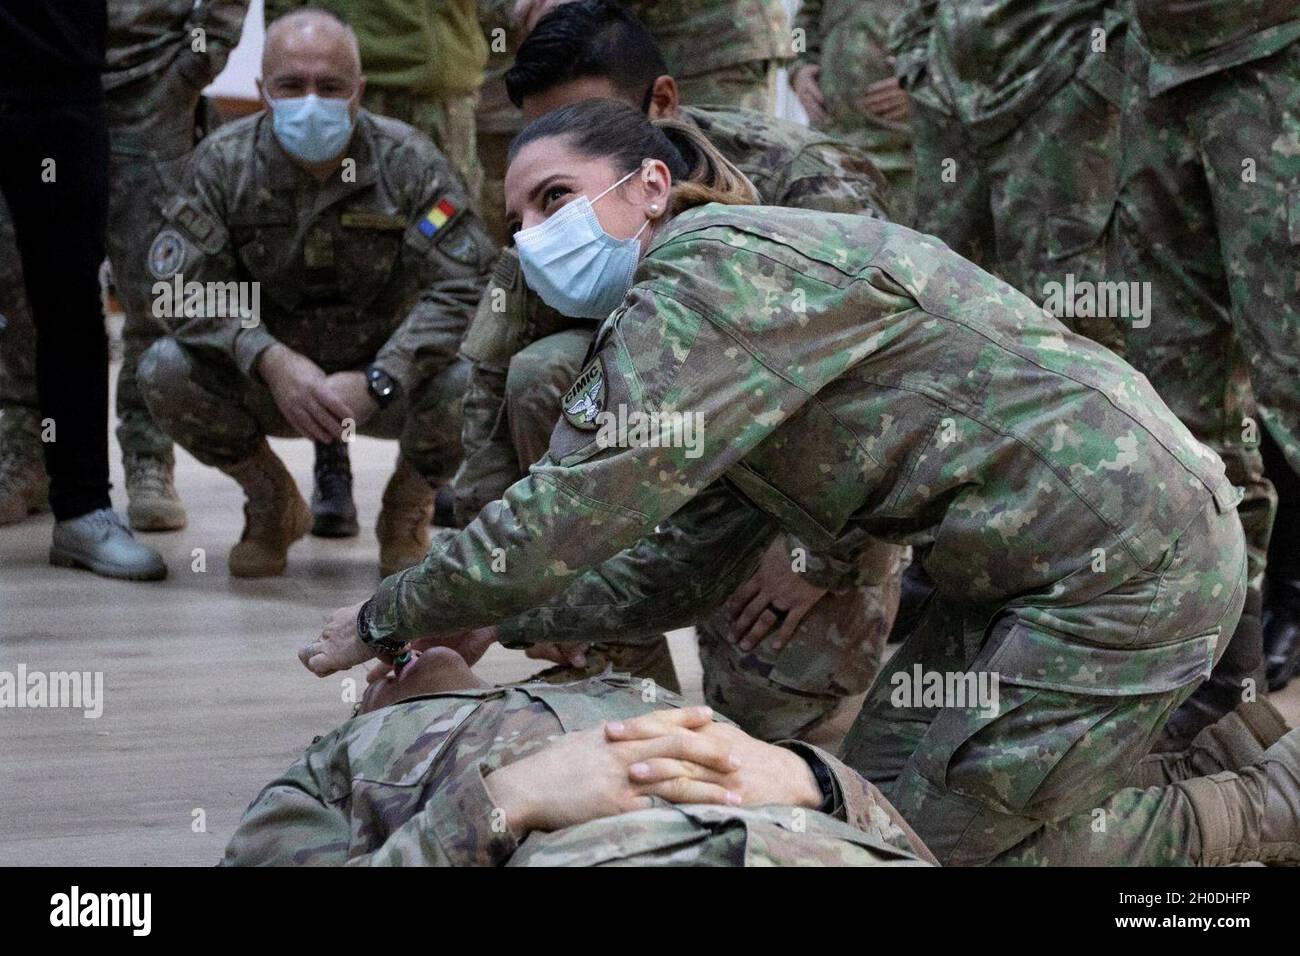 BUCHAREST, Romania – Romanian troops observe a nasal pharyngeal airway application during a combat lifesaver course given here Feb 4. Exchanging lifesaving knowledge and skills enhances interoperability between the two NATO partners and increases readiness within combat environments. Stock Photo